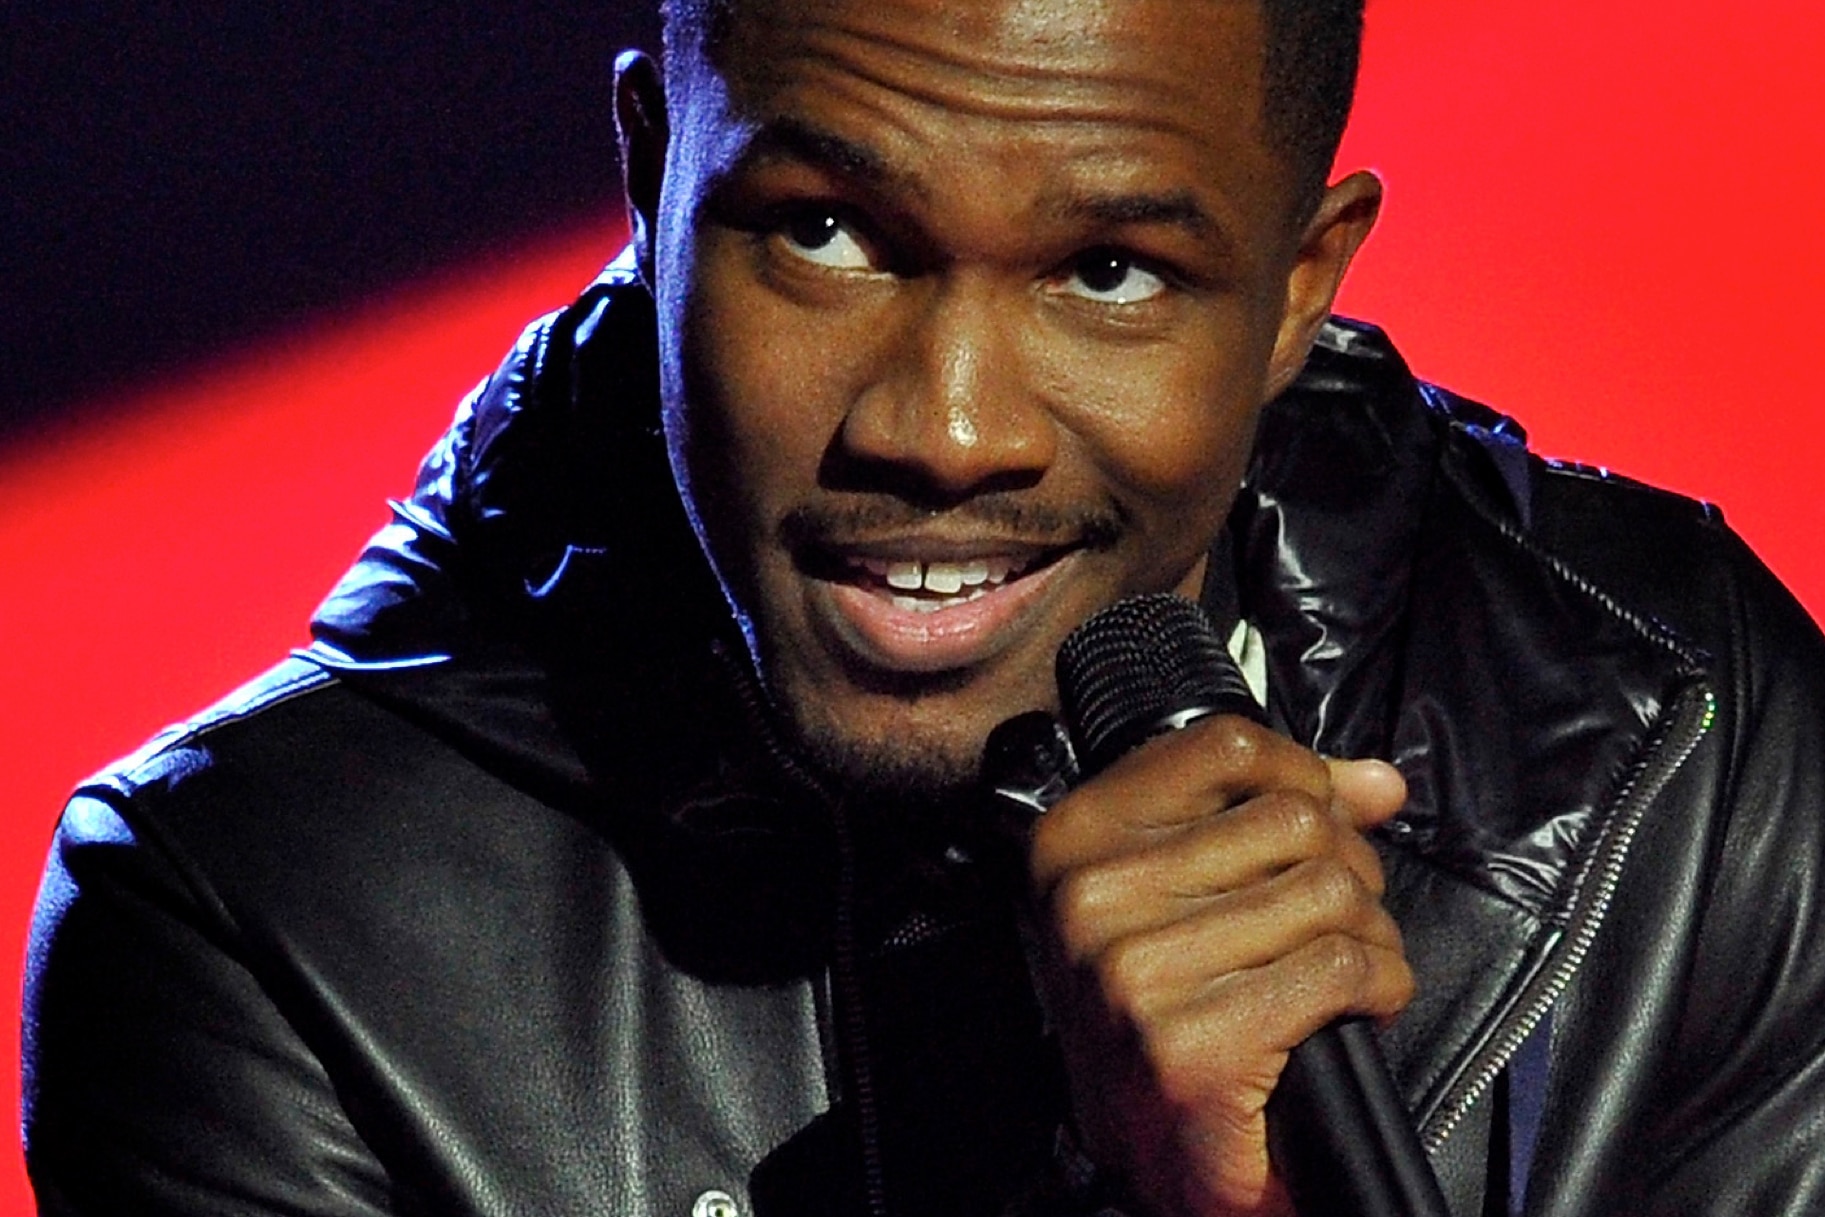 Frank Ocean Finally Stops Playing Games New Album To Drop This Friday